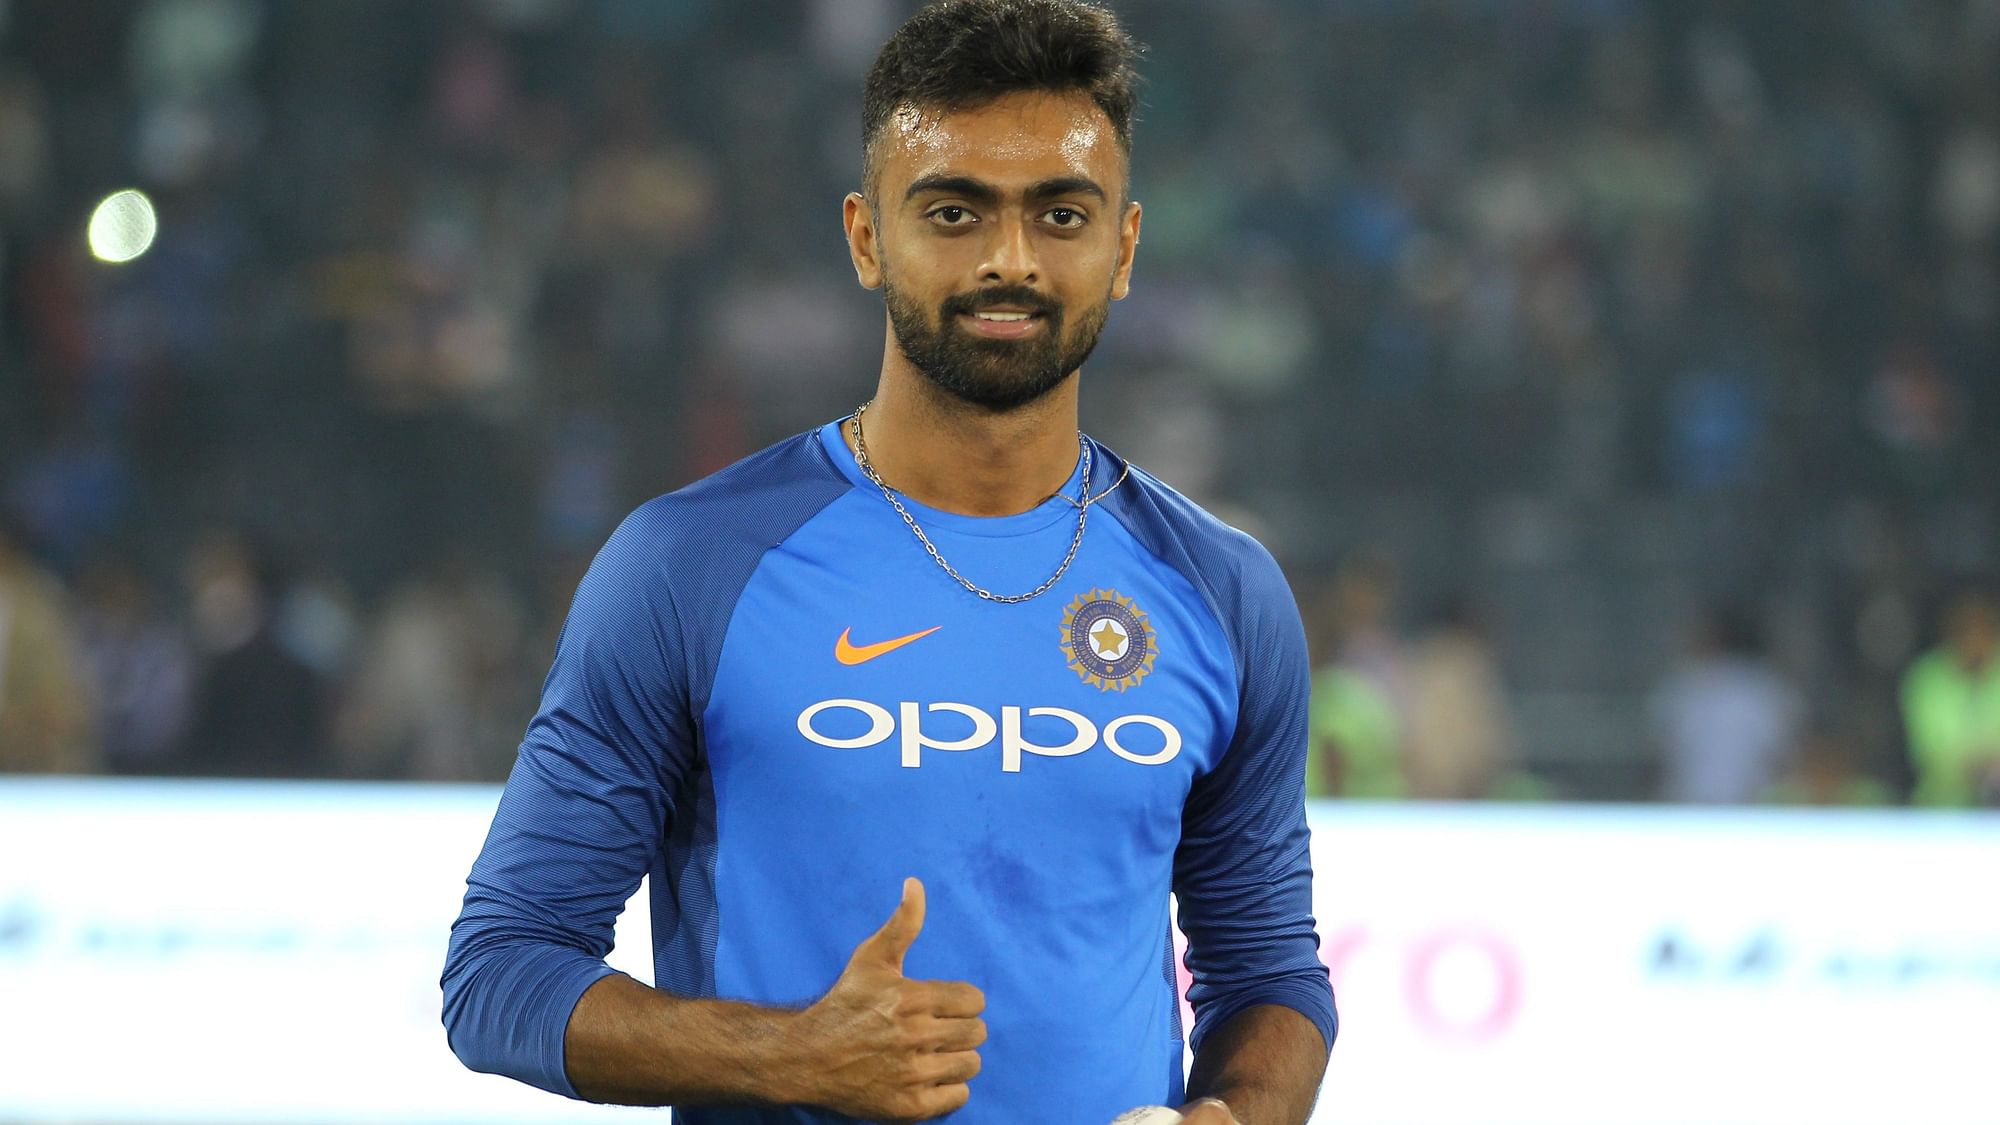 Jaydev Unadkat has not been picked for India’s Sri Lanka tour in July.